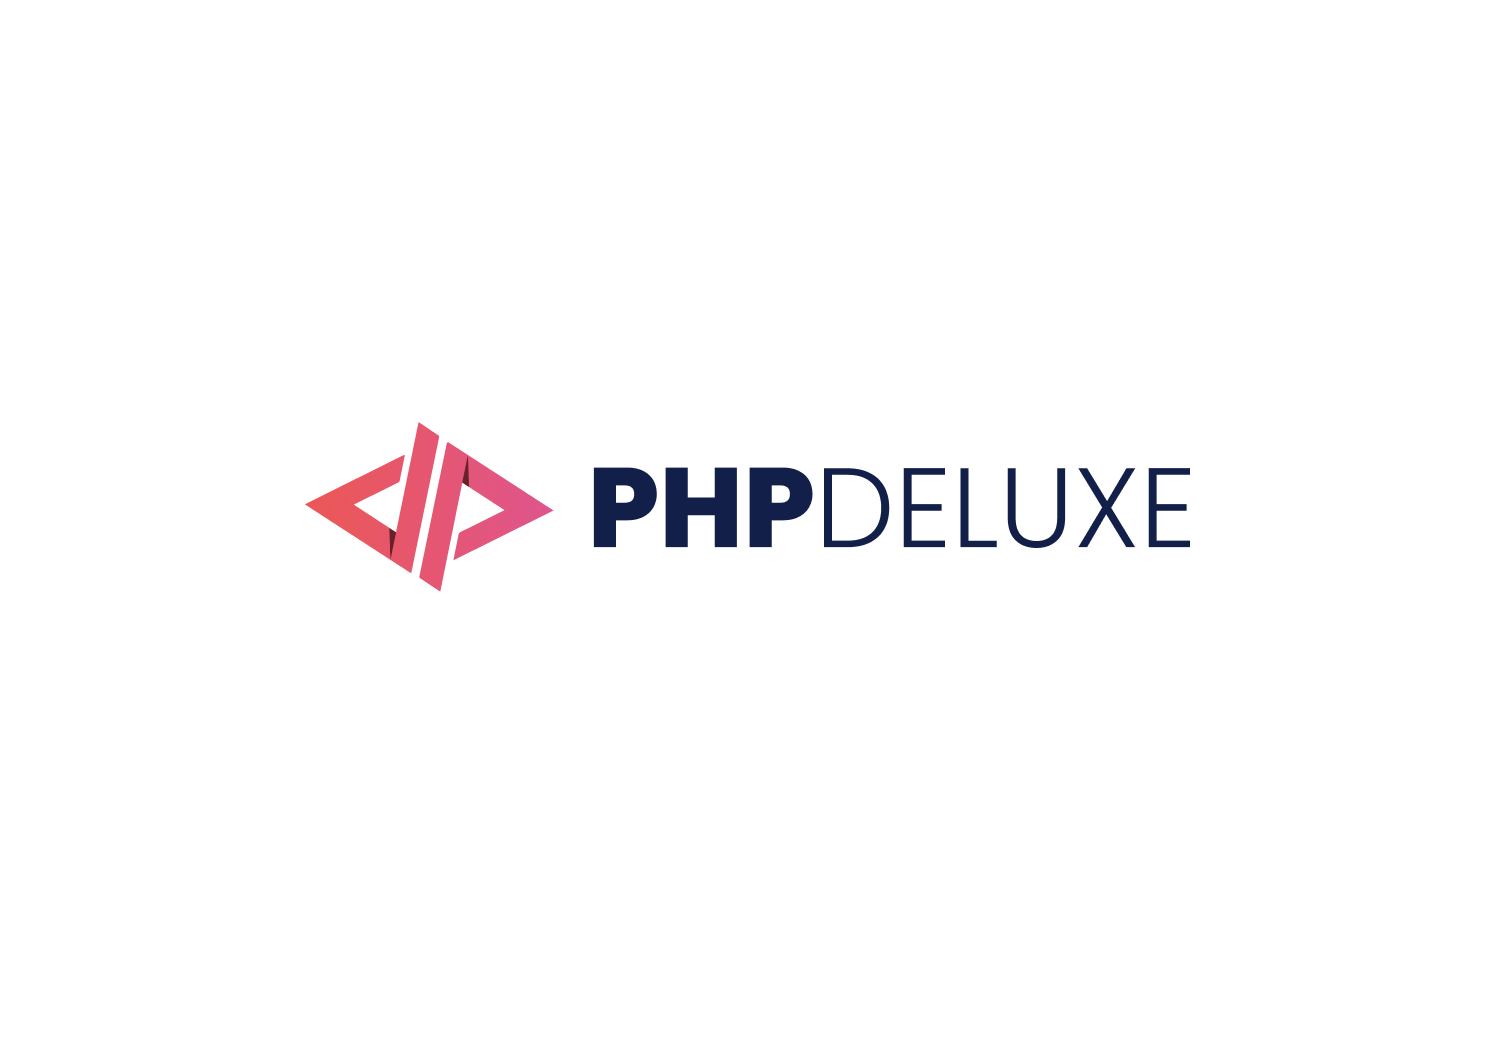 (c) Phpdeluxe.com